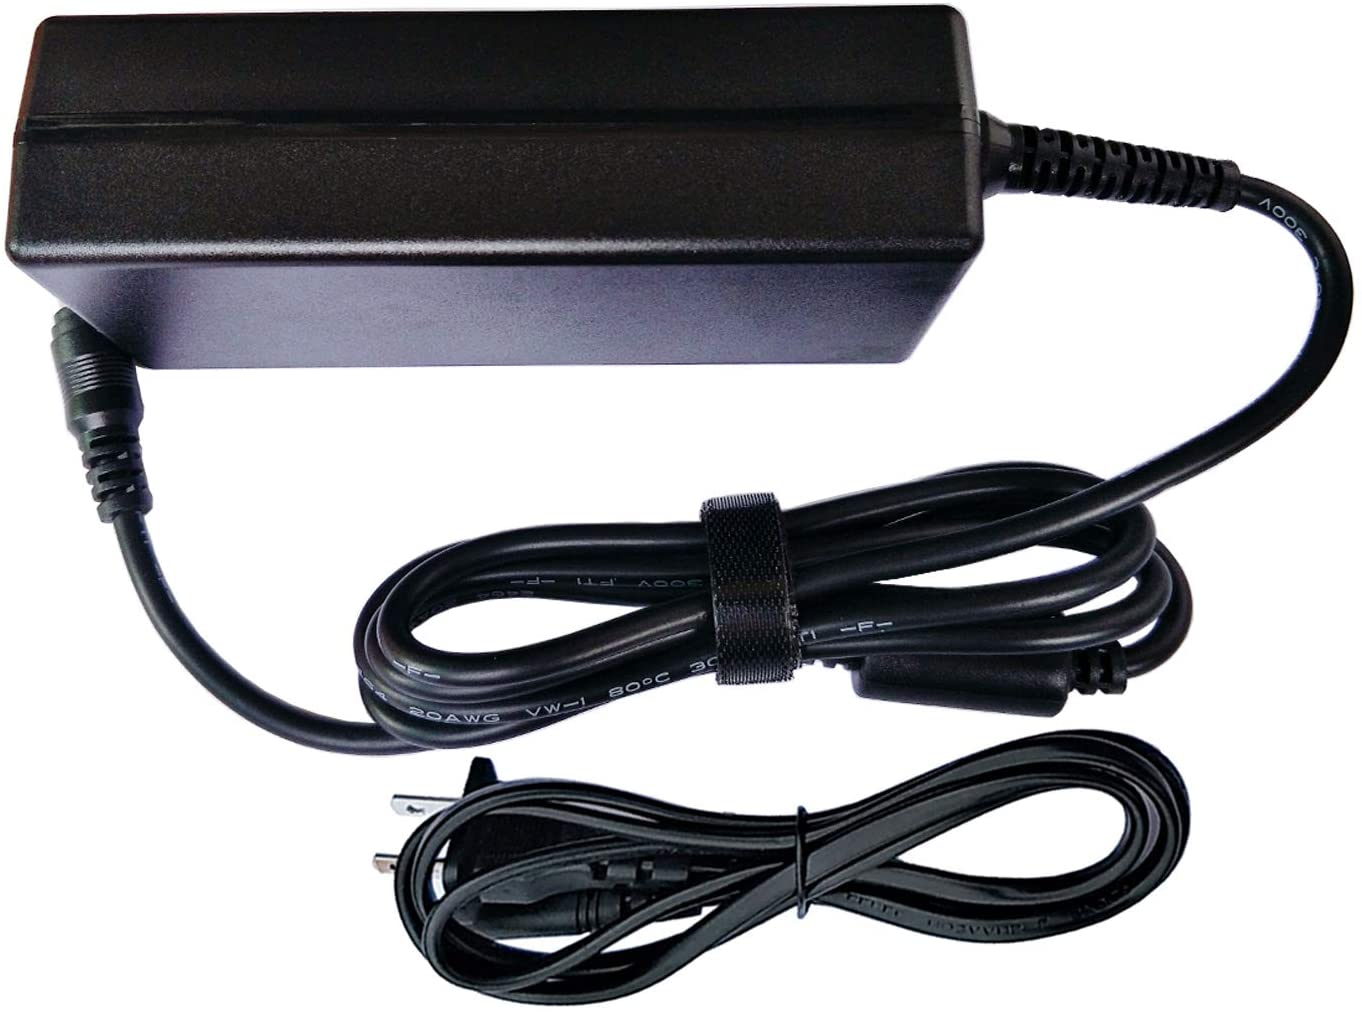 UPBRIGHT AC Adapter Compatible with HP Omen 25 Z7Y57AA Z7Y57A9 HSTND-9481-F 916600-001 Z7Y57AA#ABA Z7Y57A9#ABA X 25 X25 4NK94AA 4NK94AA#ABA 25f 4WH47AA 4WH47AA#ABA HSD-0021-Q L40999-001 Gaming Monitor - image 2 of 5